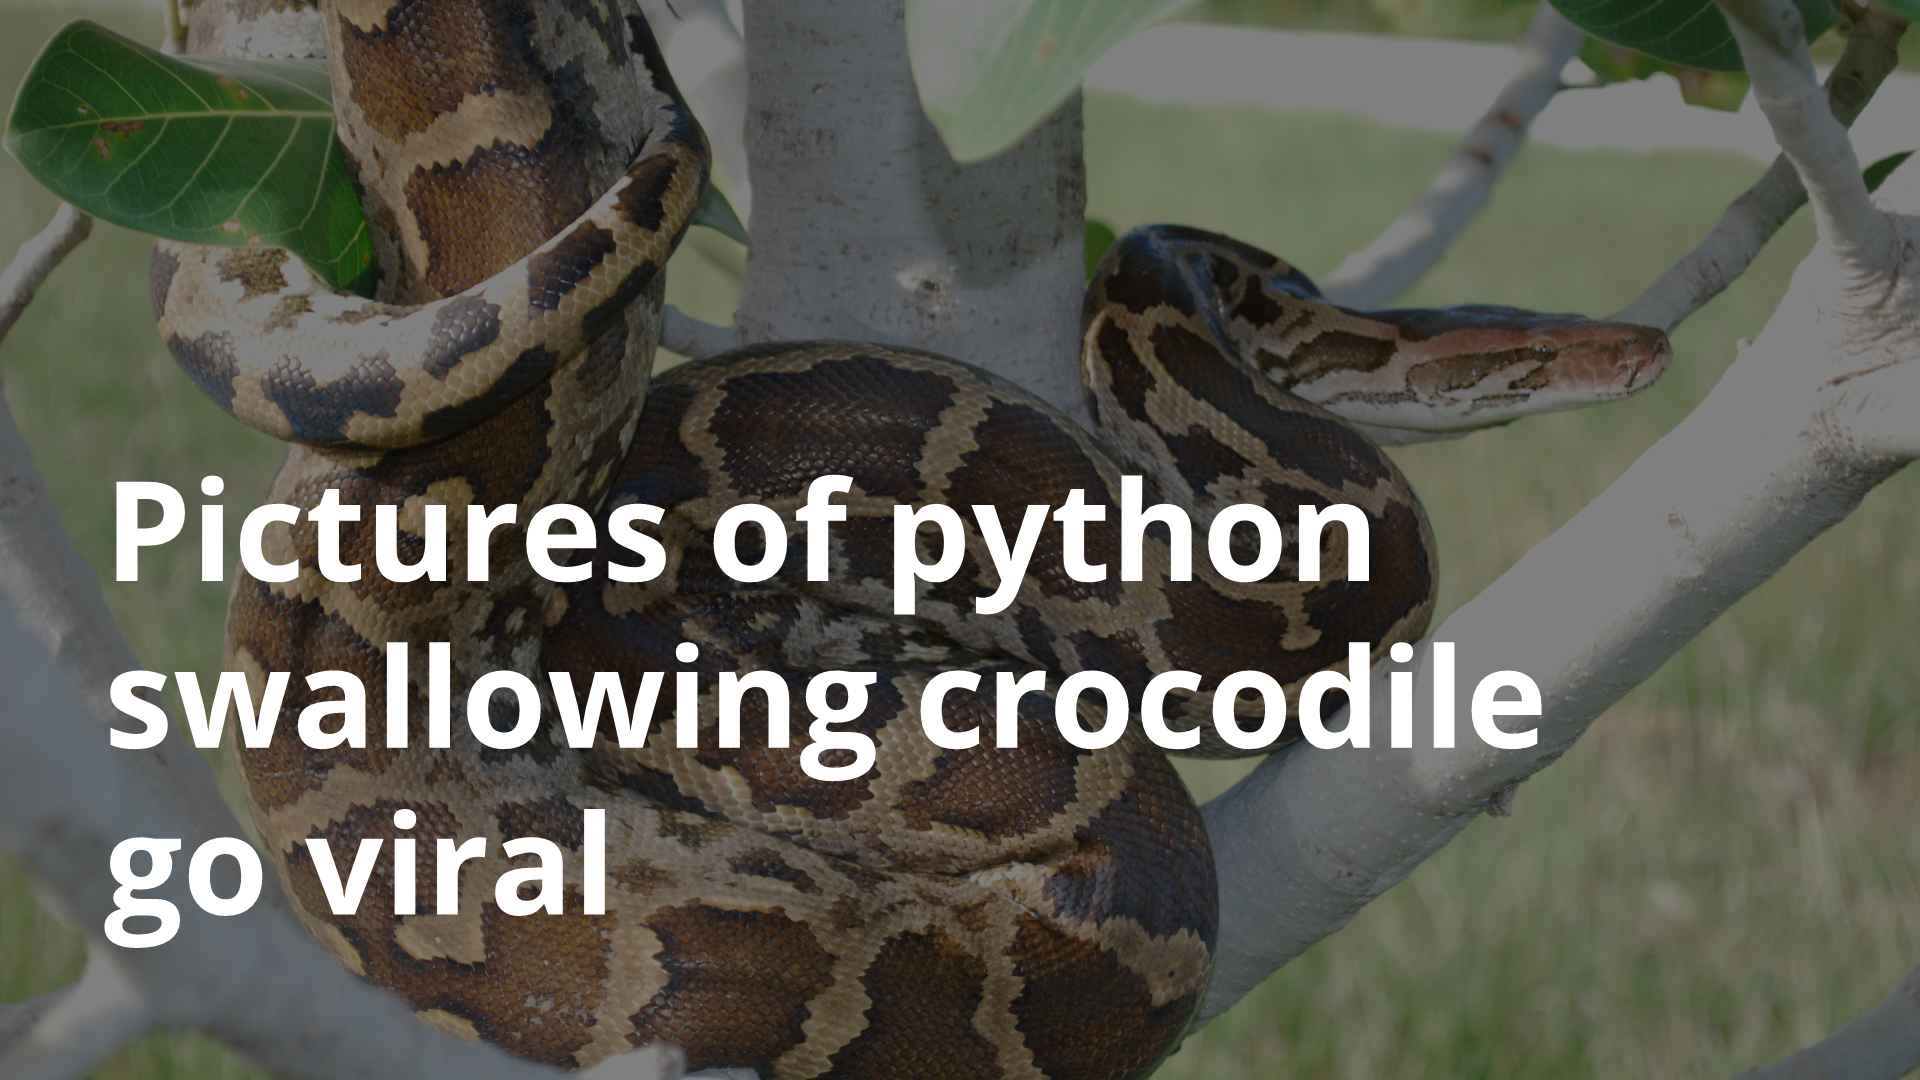 Pictures of python swallowing crocodile go viral